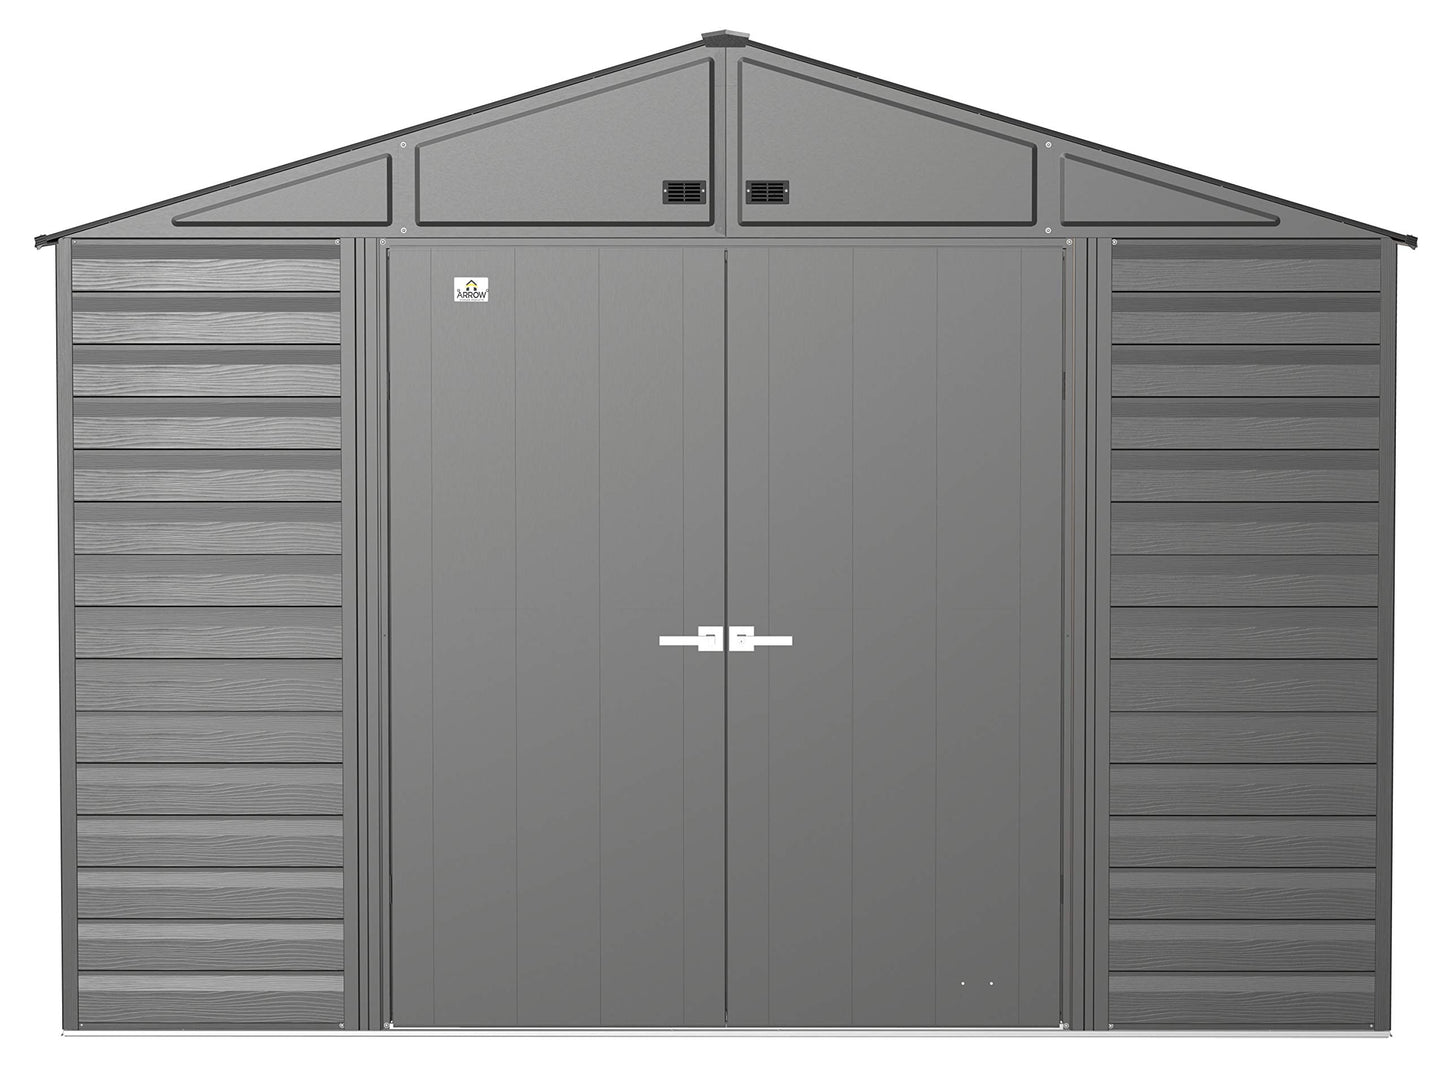 Arrow Shed Select 10' x 14' Outdoor Lockable Steel Storage Shed Building, Charcoal & Floor Frame Kit for Arrow Classic and Select Storage Sheds, Extra Large Sheds Shed Building + Frame Kit